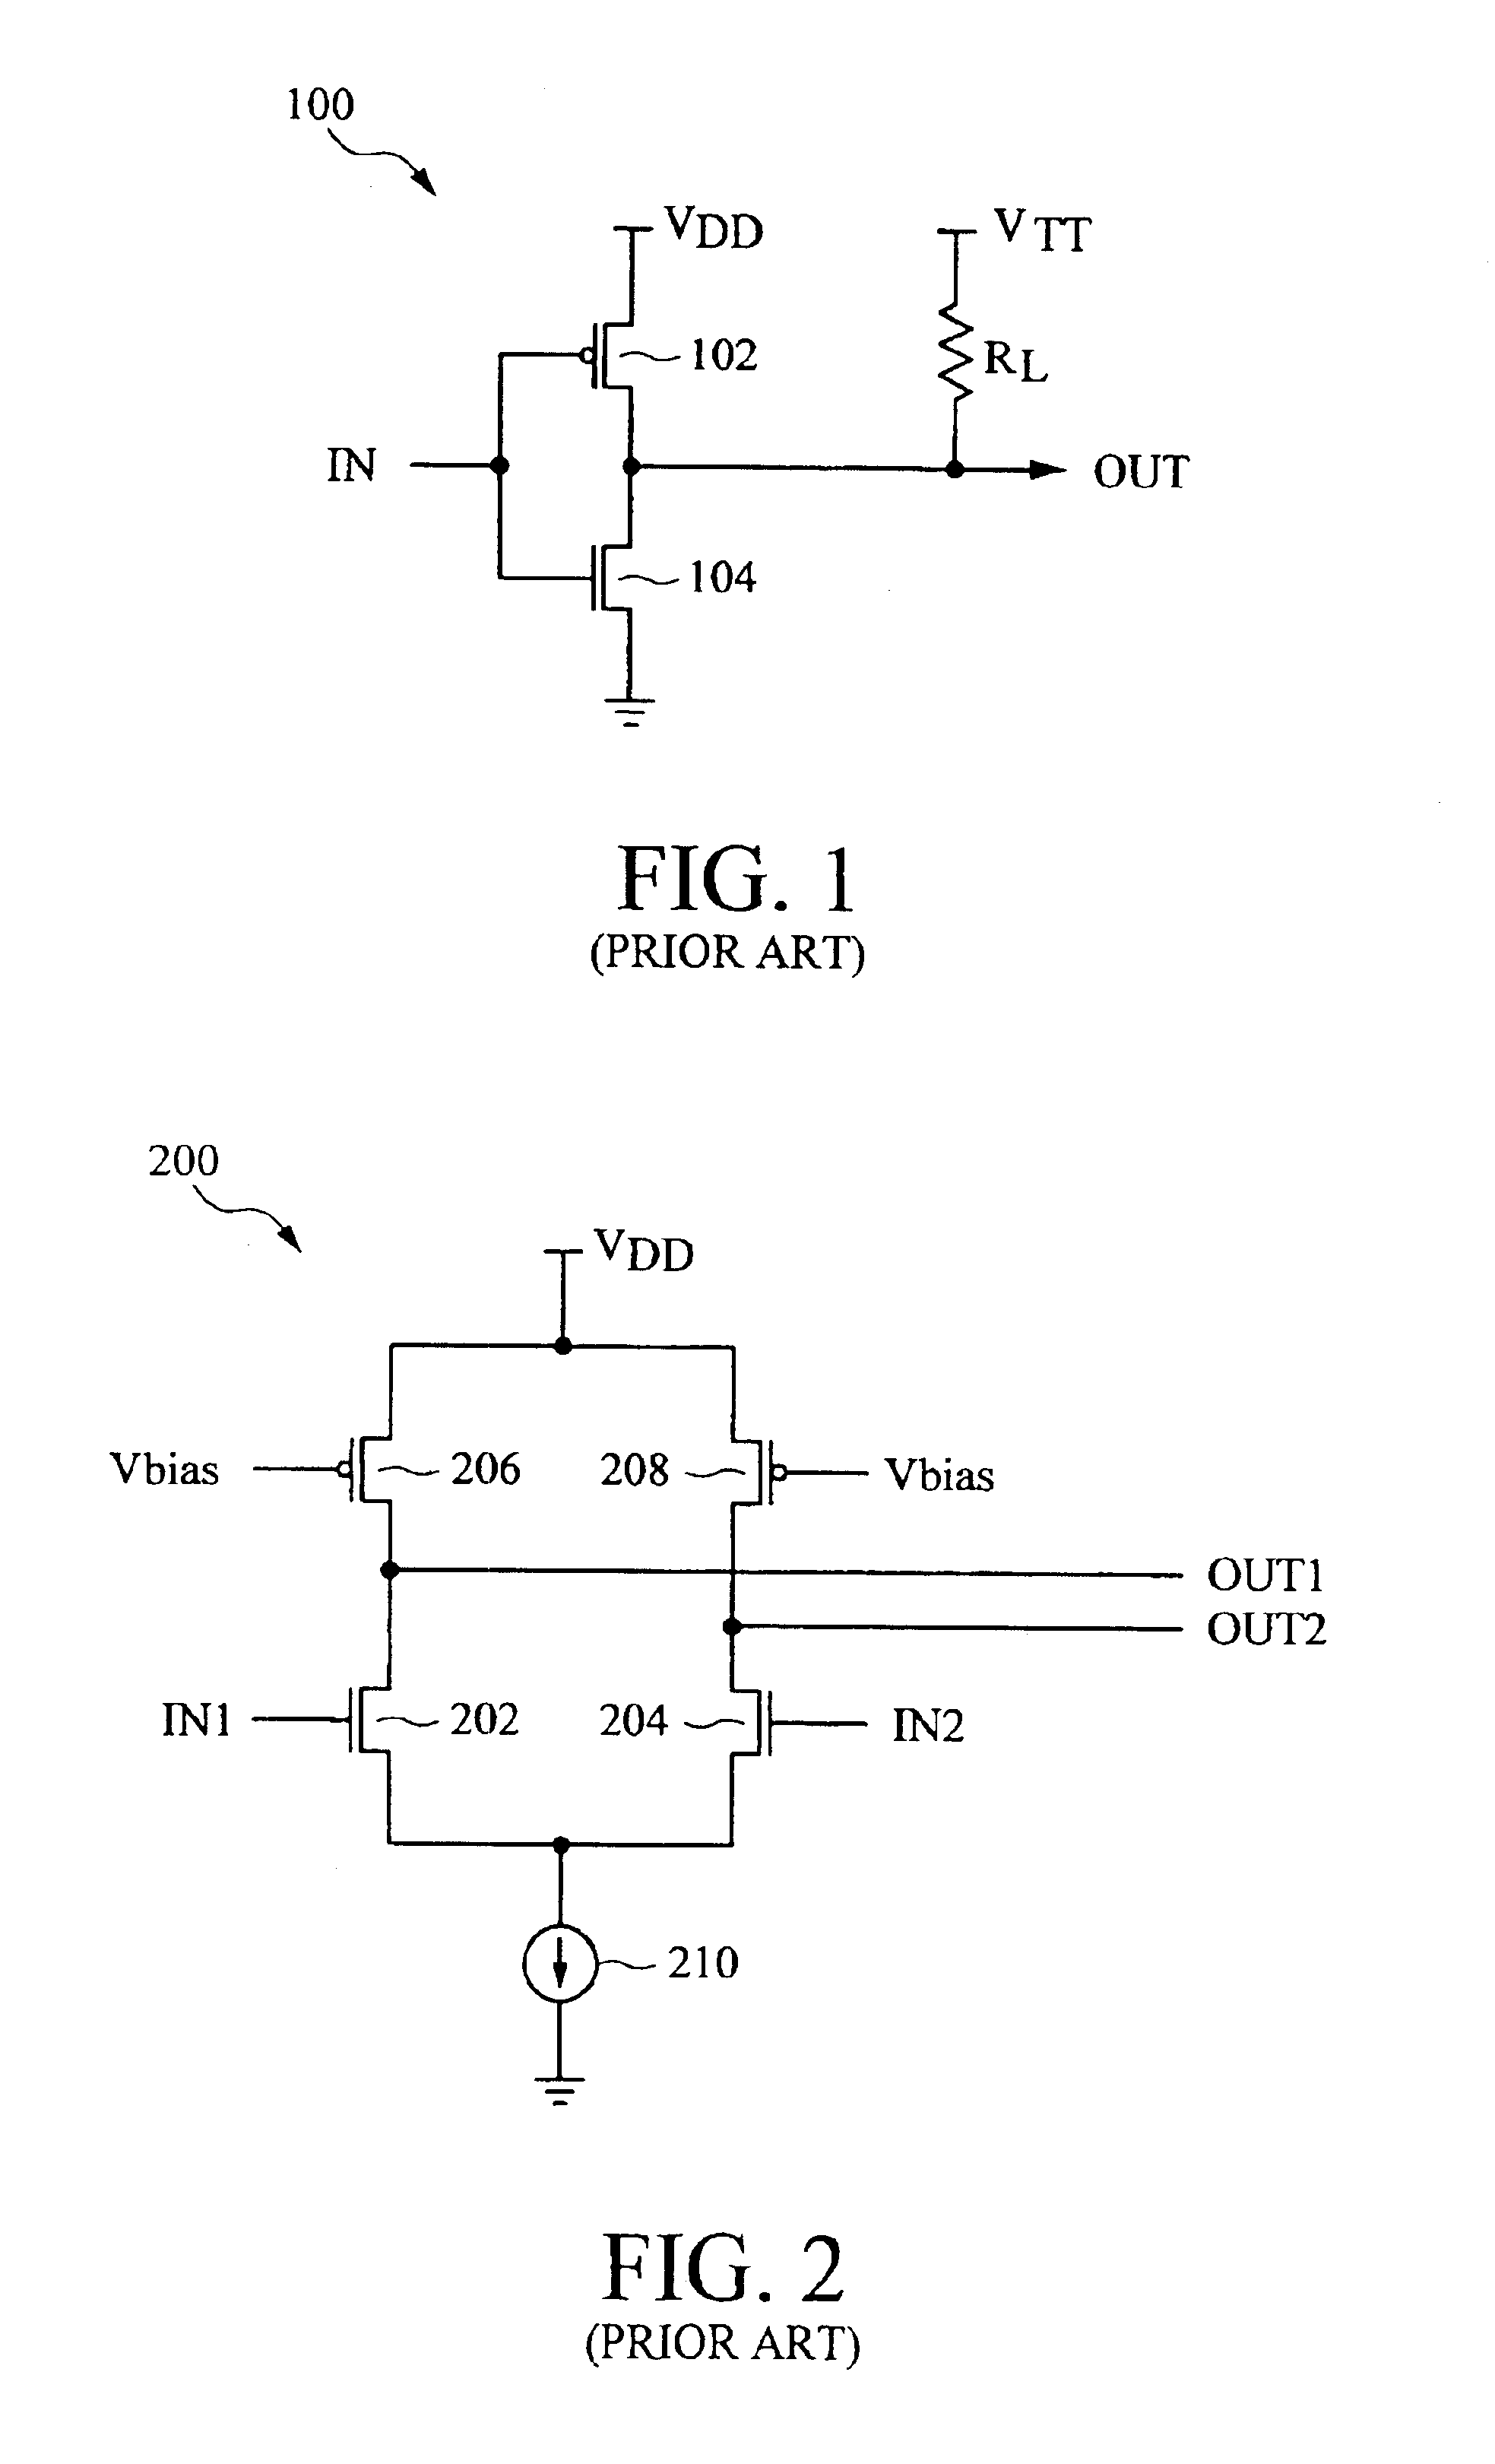 Multi-function input/output driver